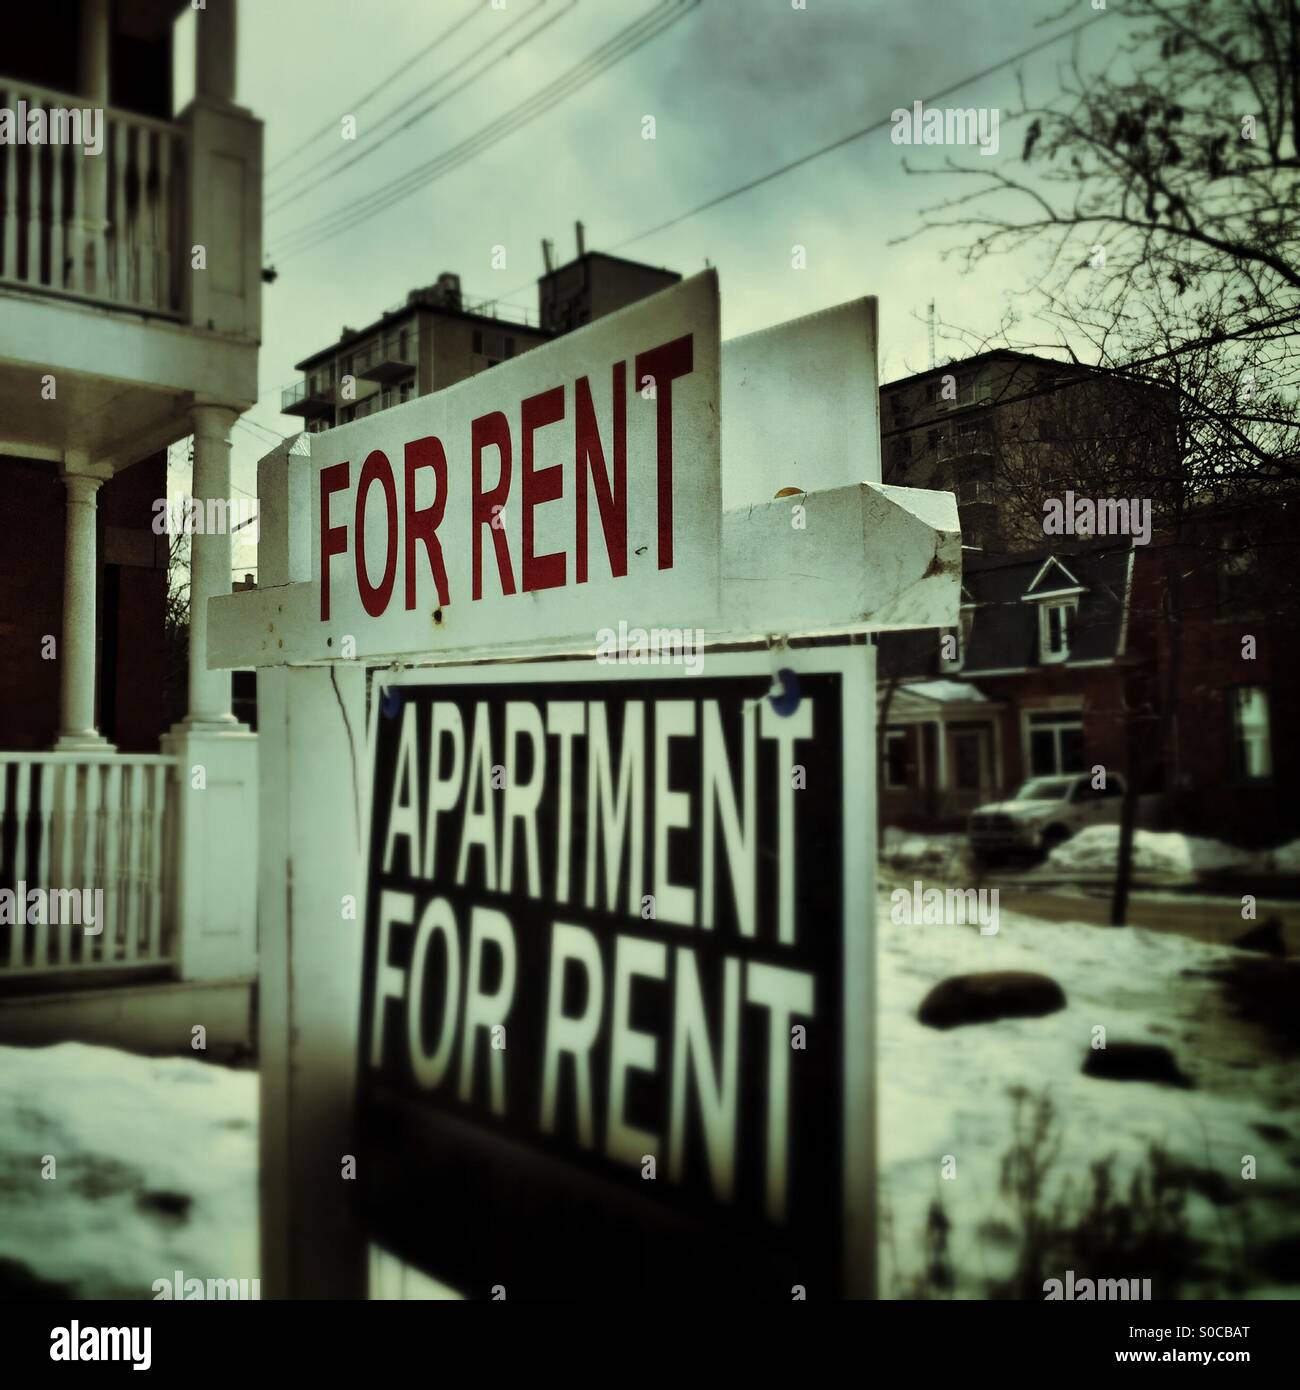 Apartment for rent sign Stock Photo